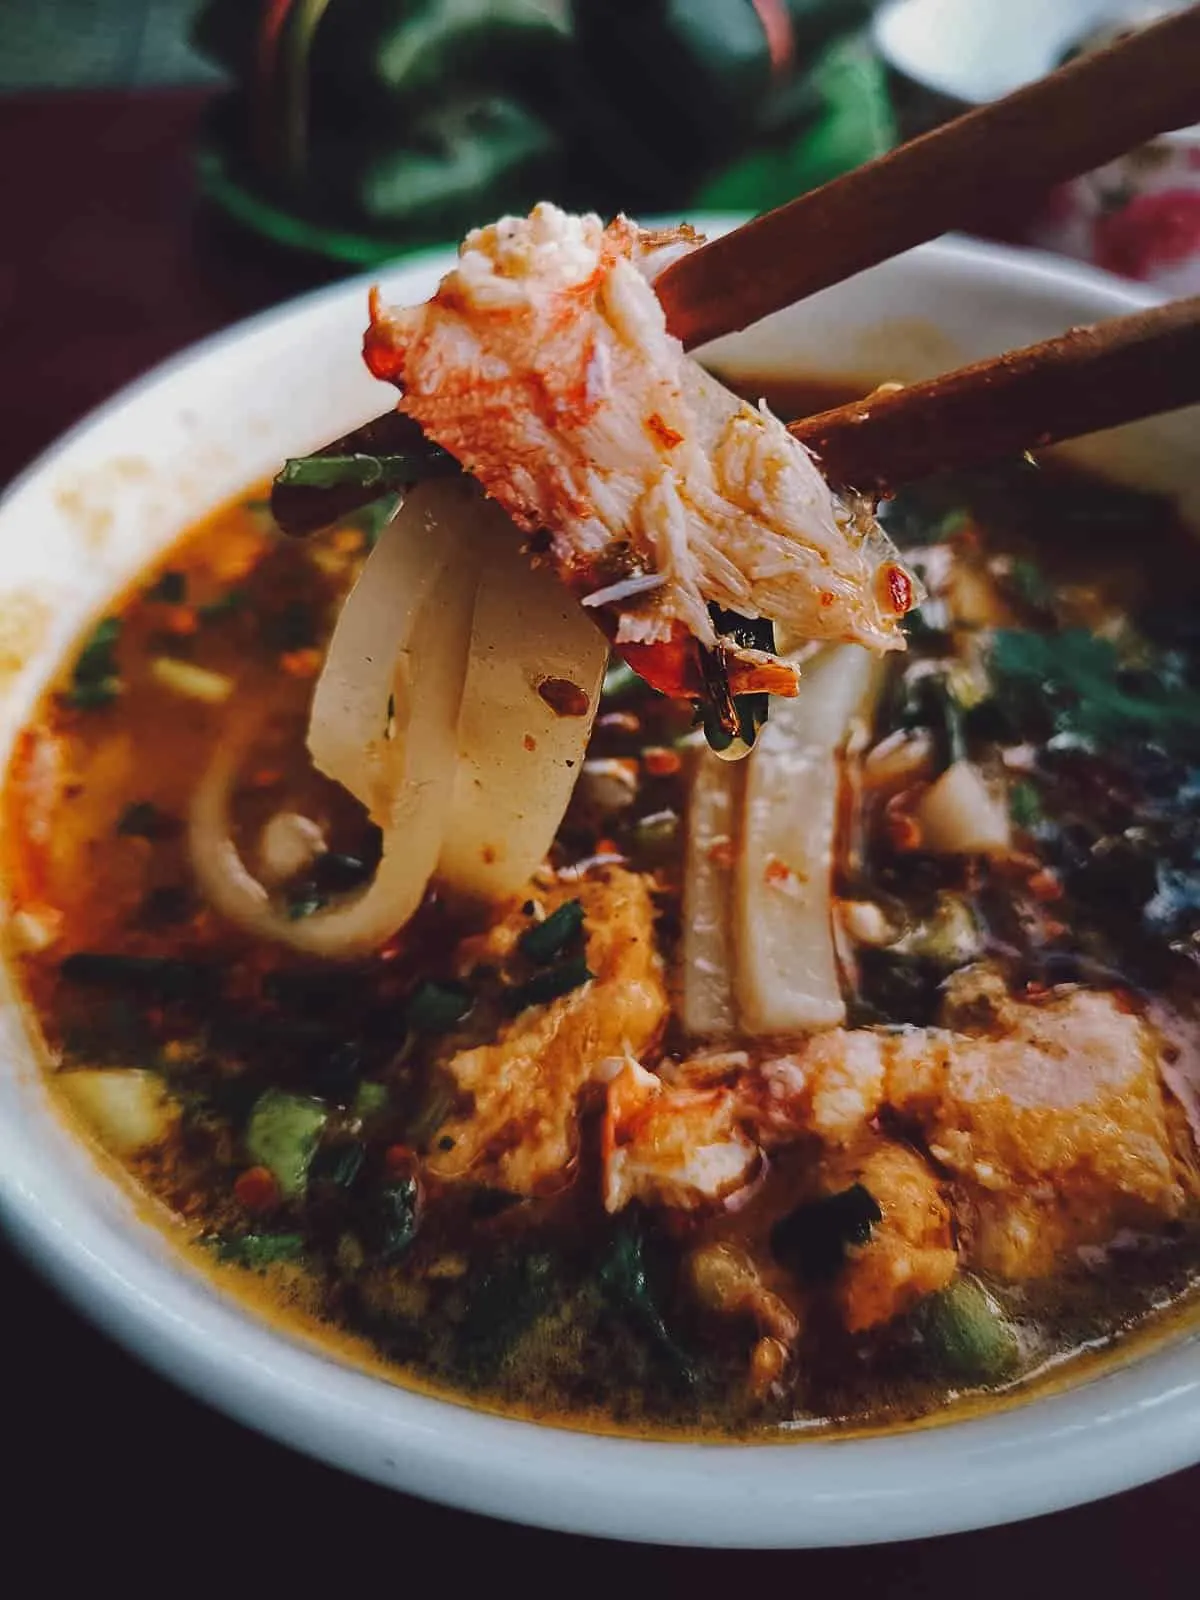 Banh canh in Hue, a tasty Vietnamese noodle soup made with thicker noodles